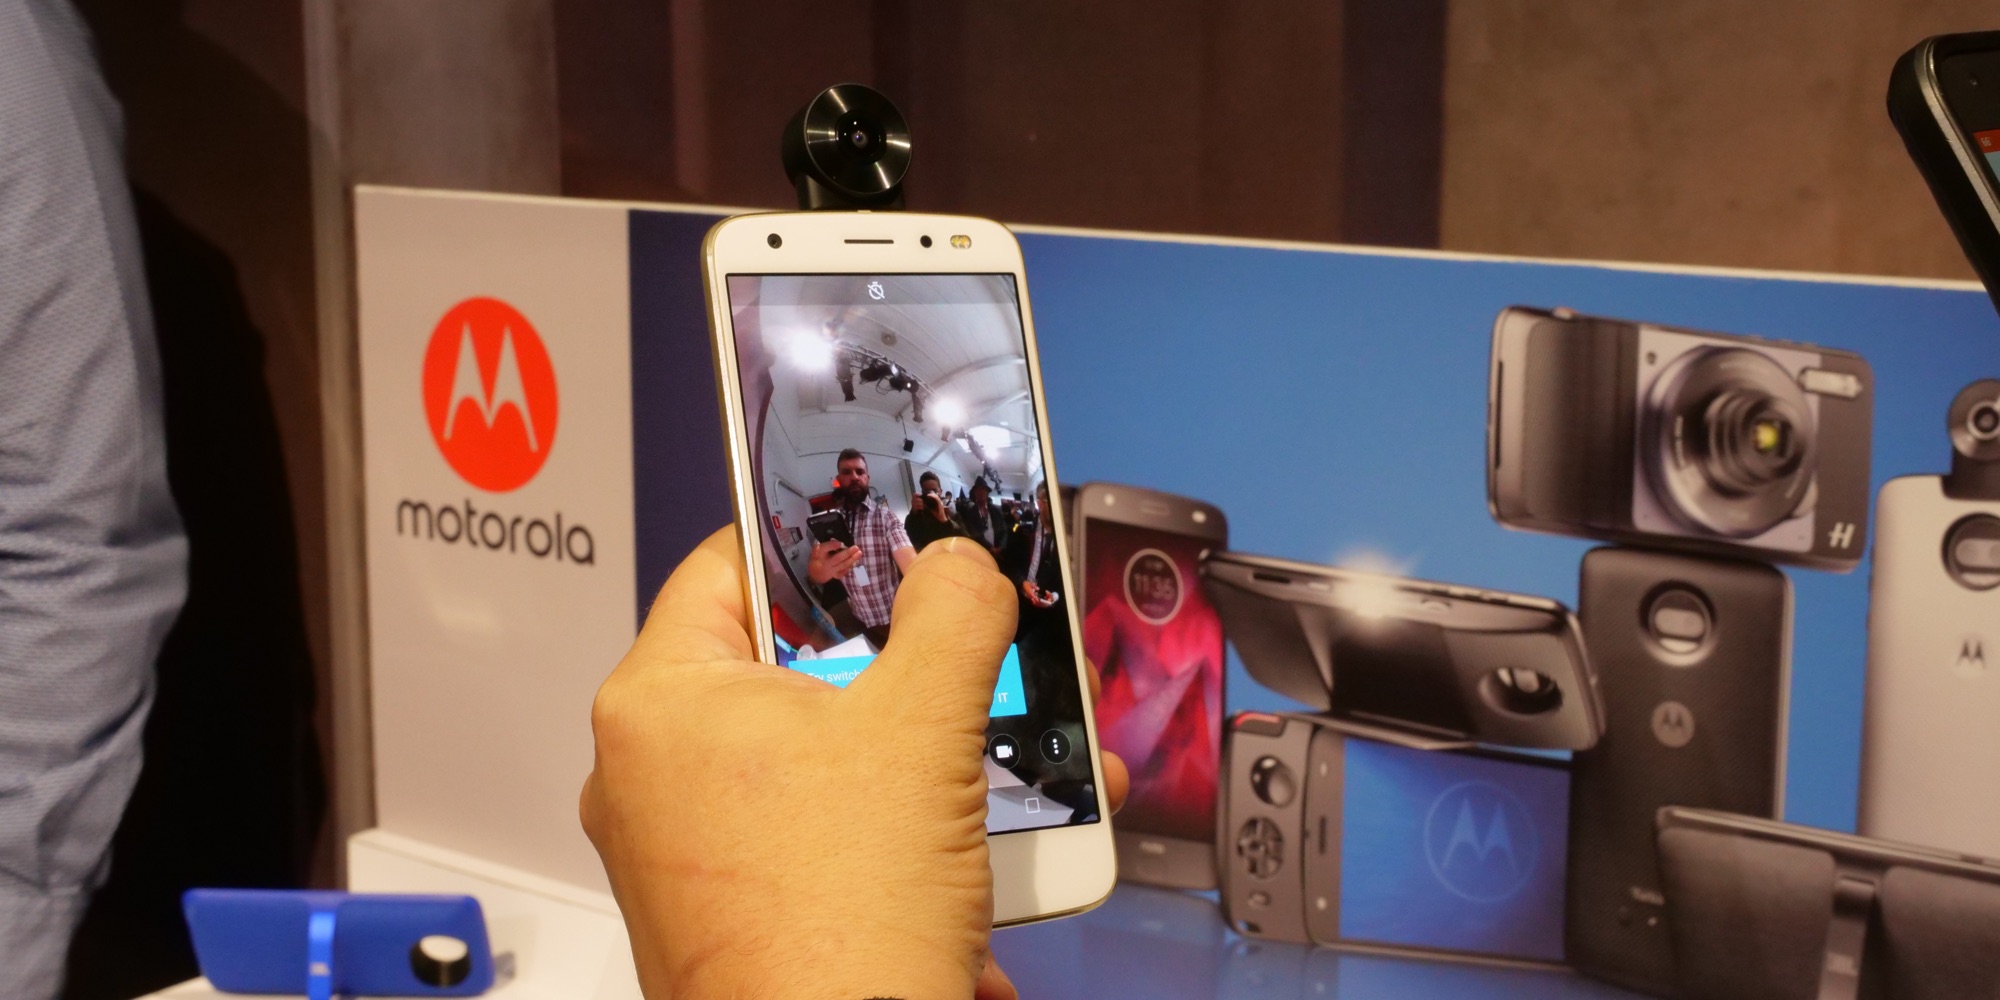 First look at the new Moto Z2 Force, Moto Mods, and 360-degree camera  [Video]